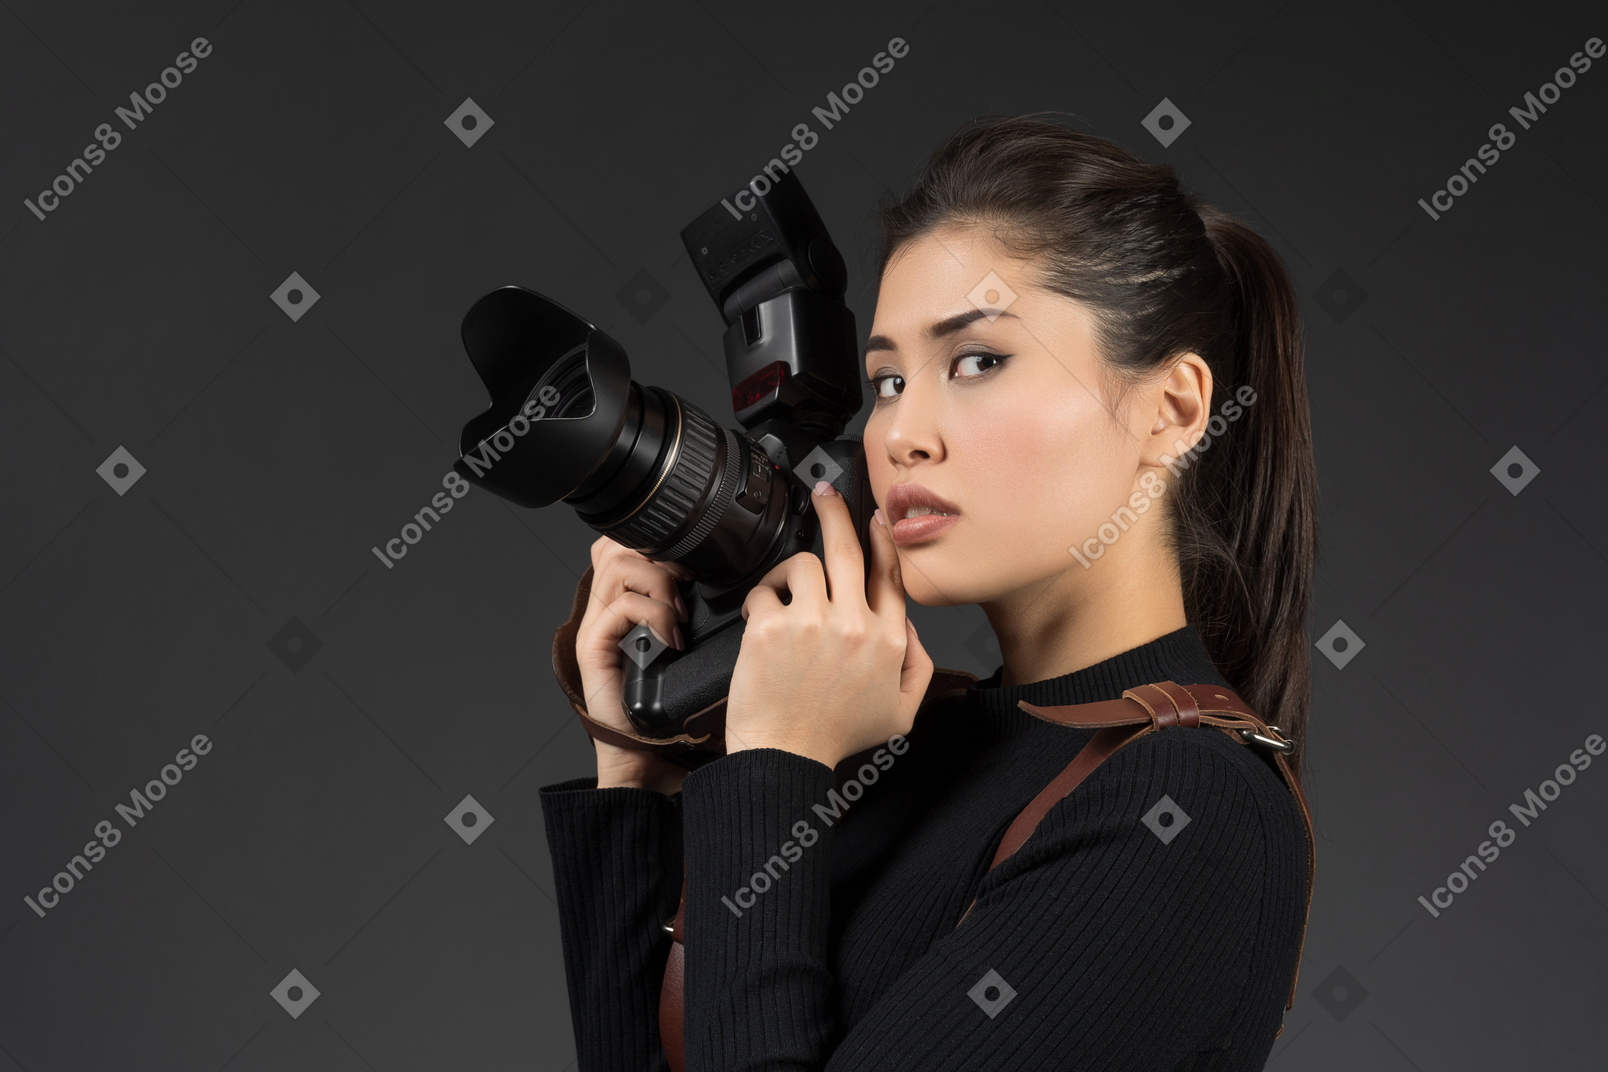 Young woman holding camera and posing for a photo